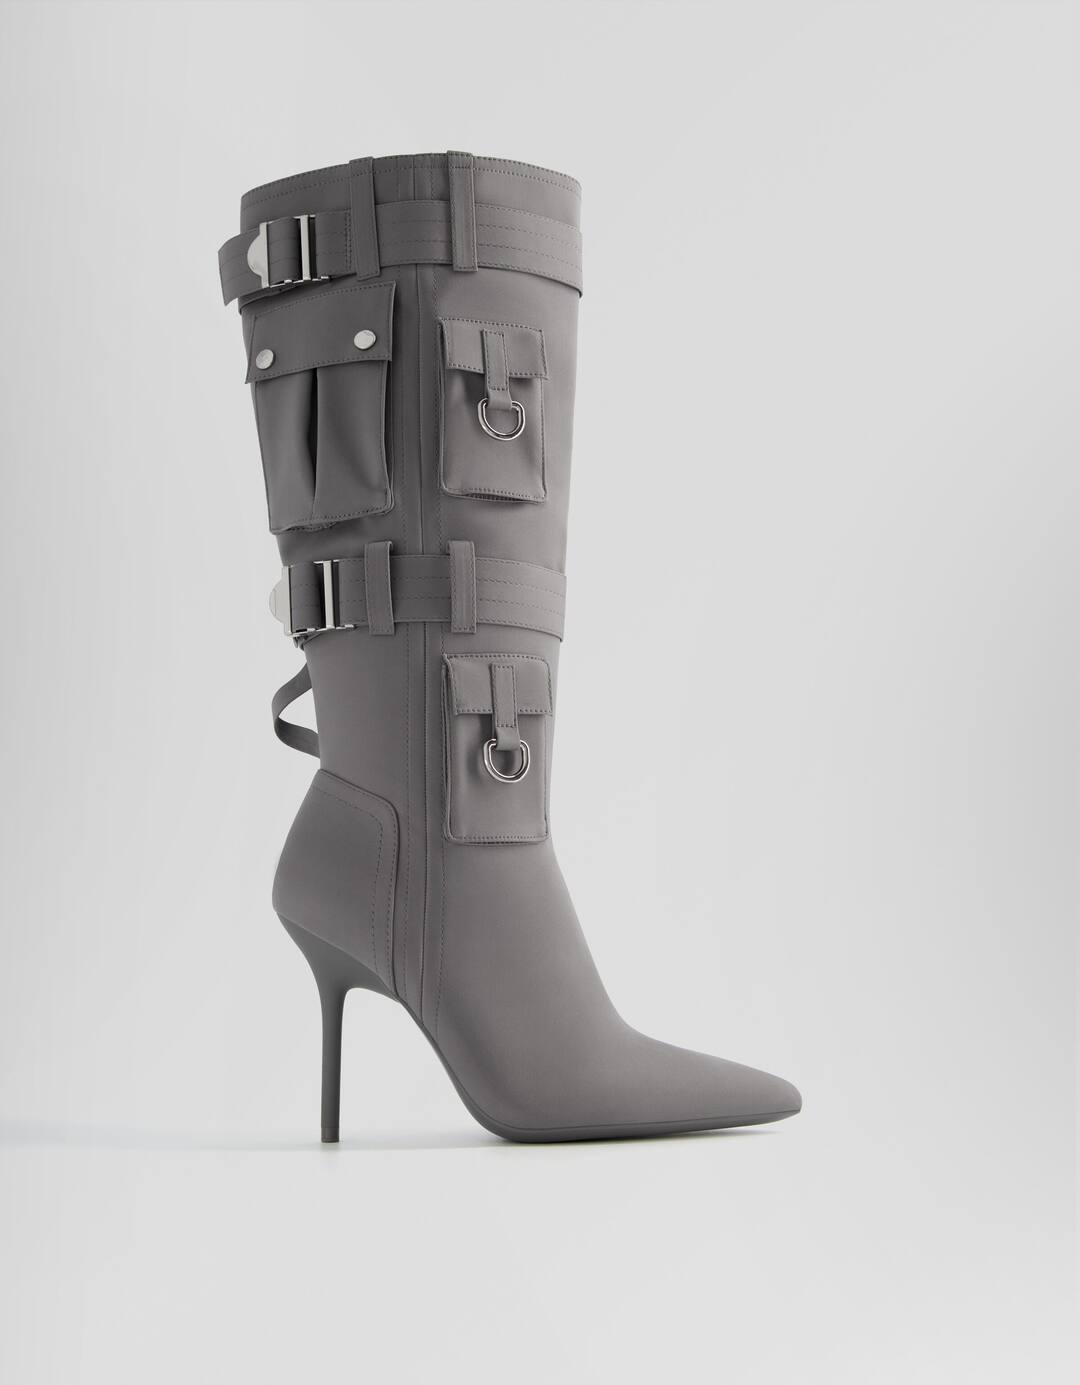 Stiletto heel boots with metal detail pockets